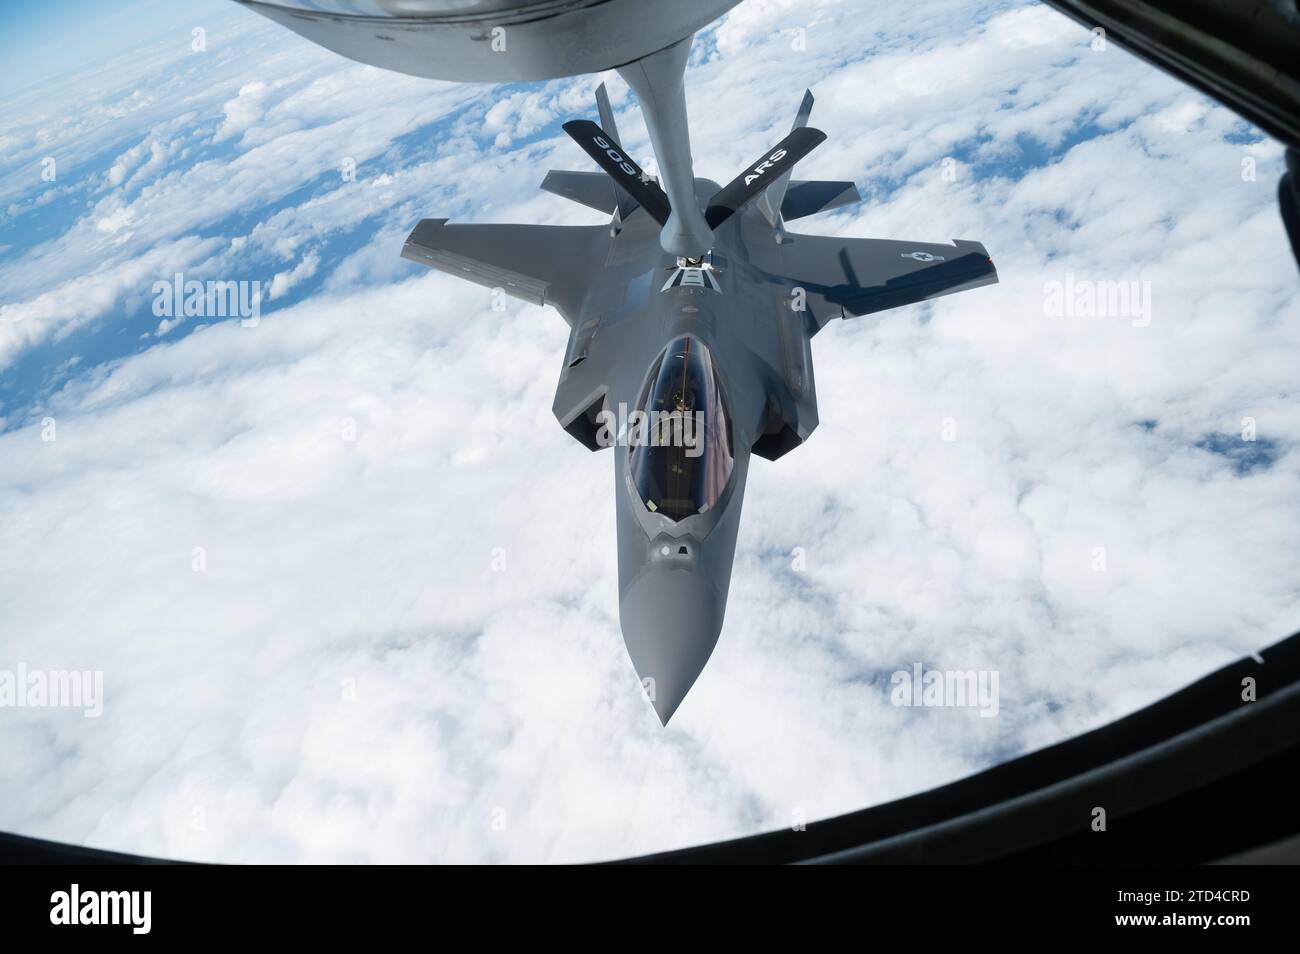 East China Sea, International Waters. 05 December, 2023. A U.S Air Force F-35A Lightning II stealth fighter aircraft assigned to the 356th Expeditionary Fighter Squadron, refuels from an Air Force KC-135 Stratotanker, December 5, 2023 over the East China Sea.  Credit: A1C Tylir Meyer/U.S. Air Force/Alamy Live News Stock Photo